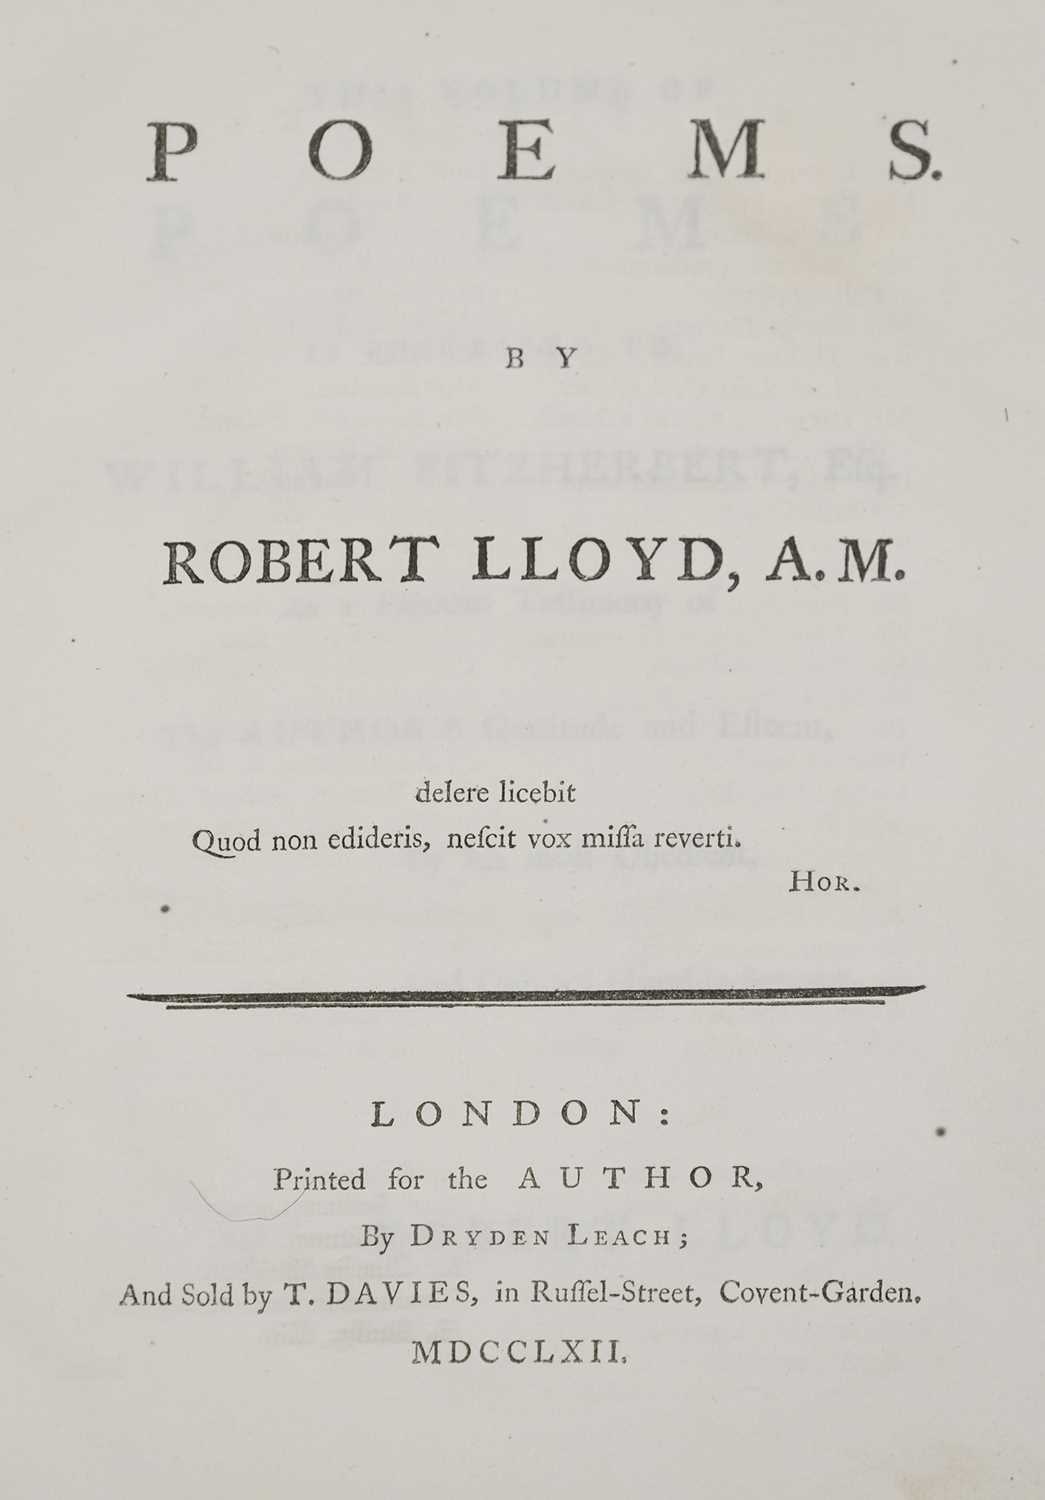 Lot 93 - Lloyd (Robert). Poems, London: Printed for the Author, 1762